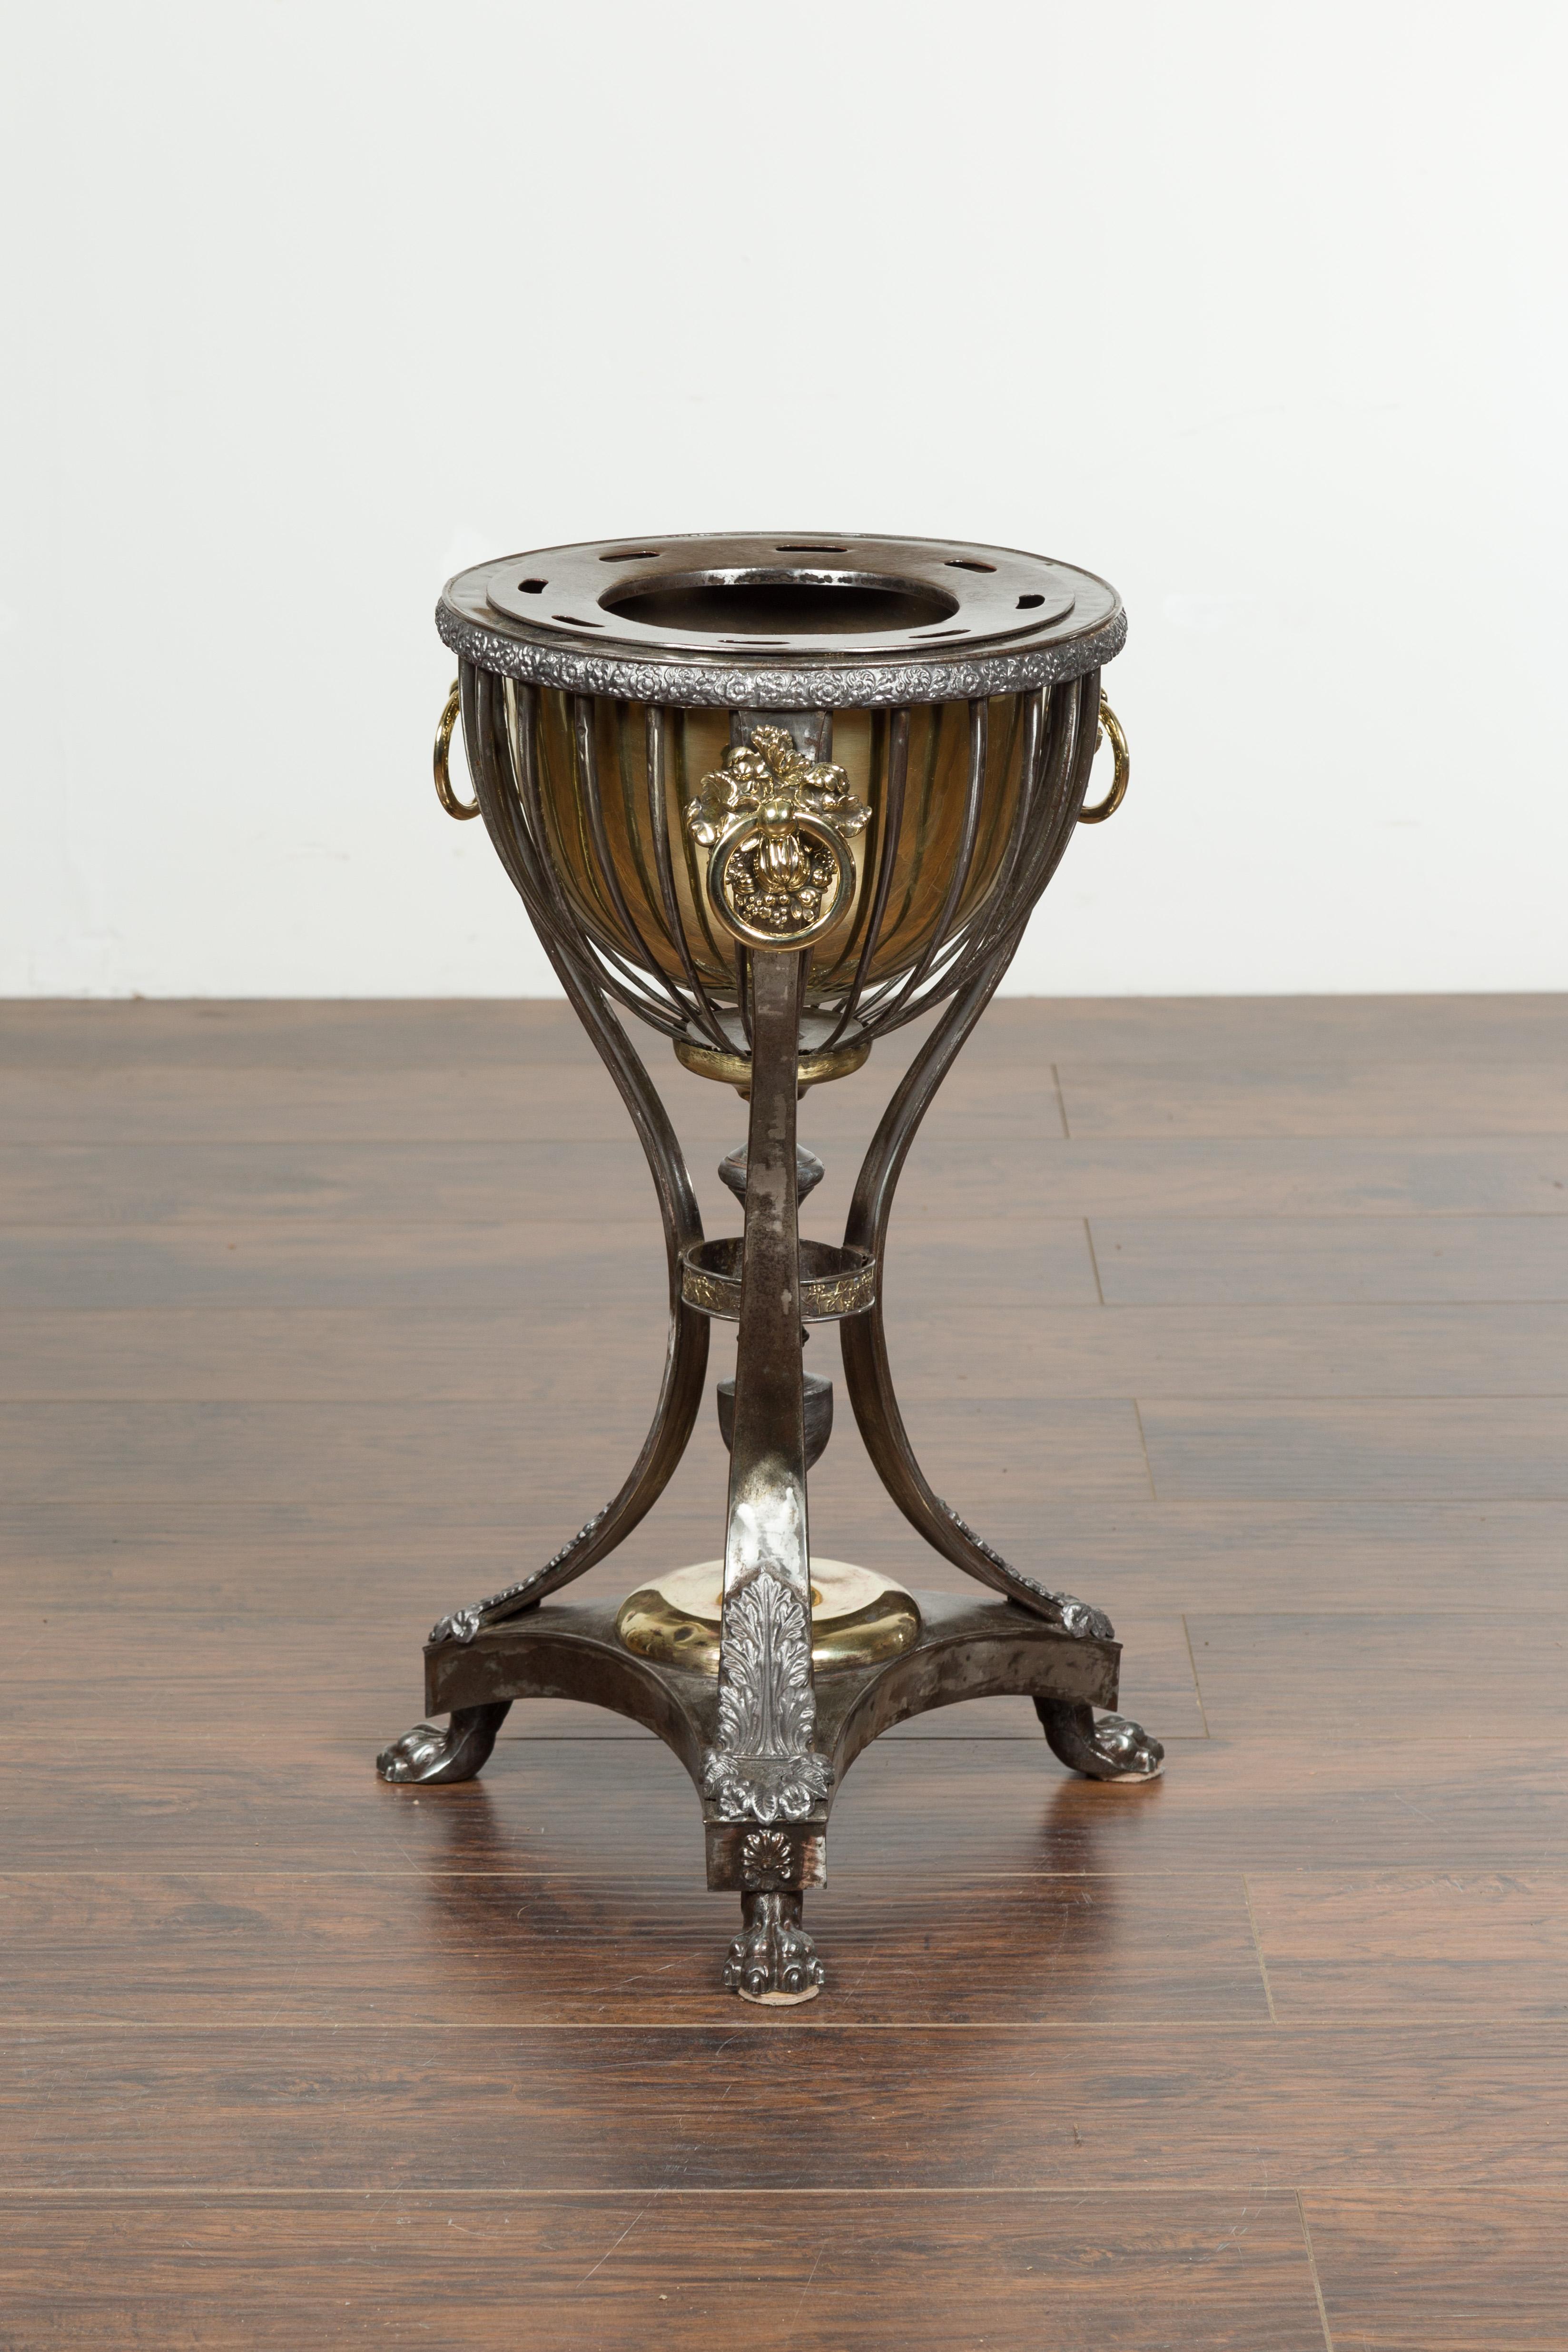 An English steel and brass wine cooler from the early 19th century, with foliage and fruit motifs and paw feet. Created in England during the first quarter of the 19th century, this wine cooler attracts our attention with its contrasting colors and